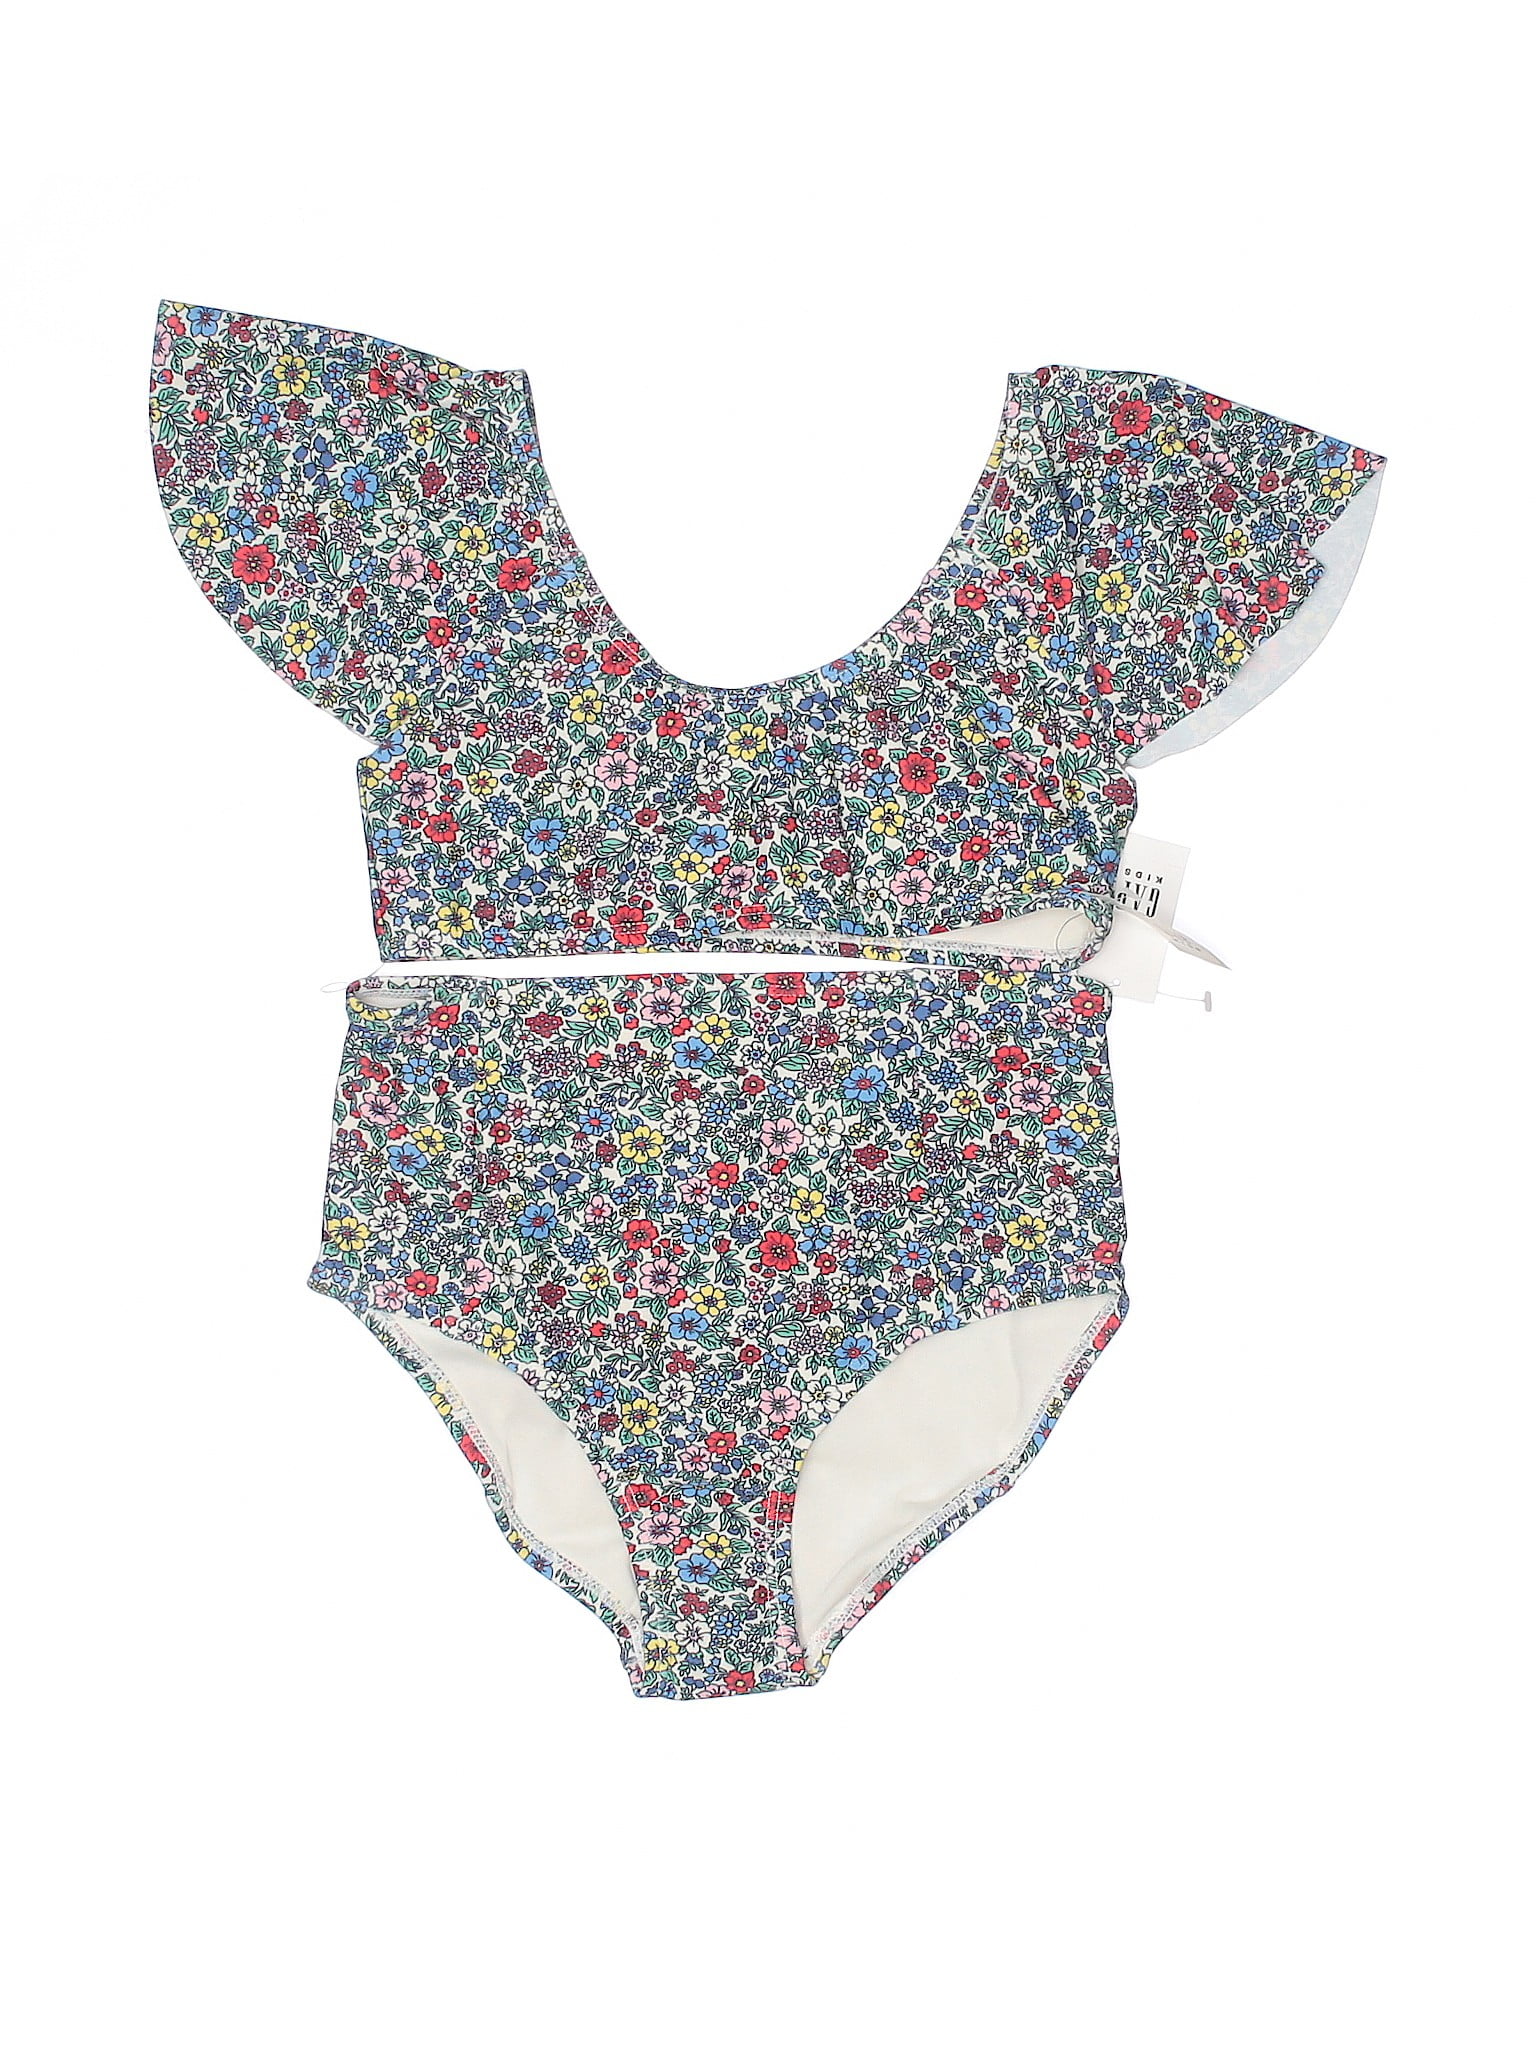 Gap Kids - Pre-Owned Gap Kids Girl's Size L Youth Two Piece Swimsuit ...